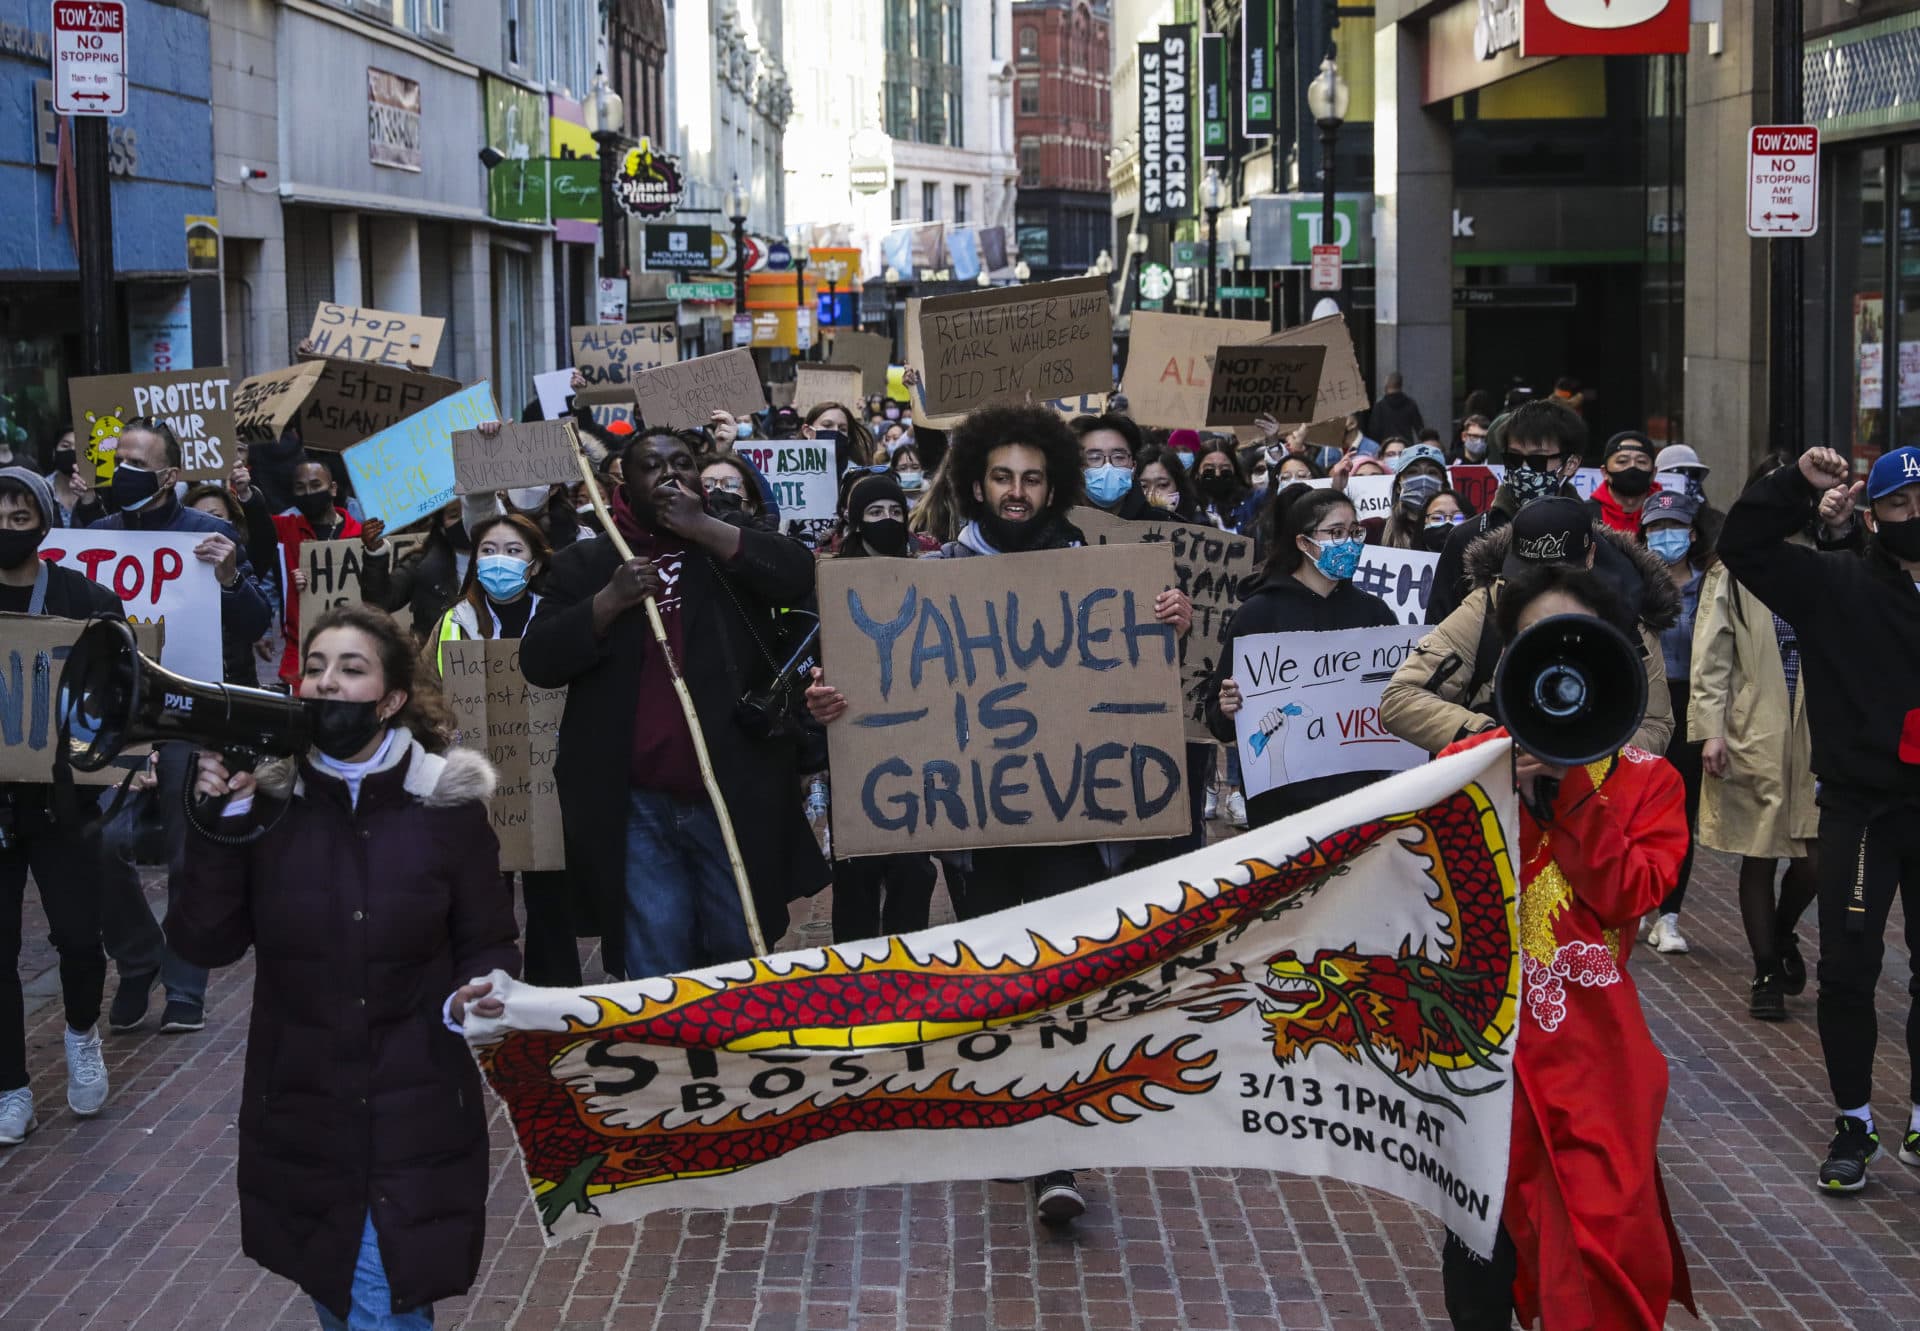 Hundreds marched through Chinatown en route to the State House during a &quot;Stop Asian Hate&quot; rally in Boston on March 13. (Erin Clark/The Boston Globe via Getty Images)